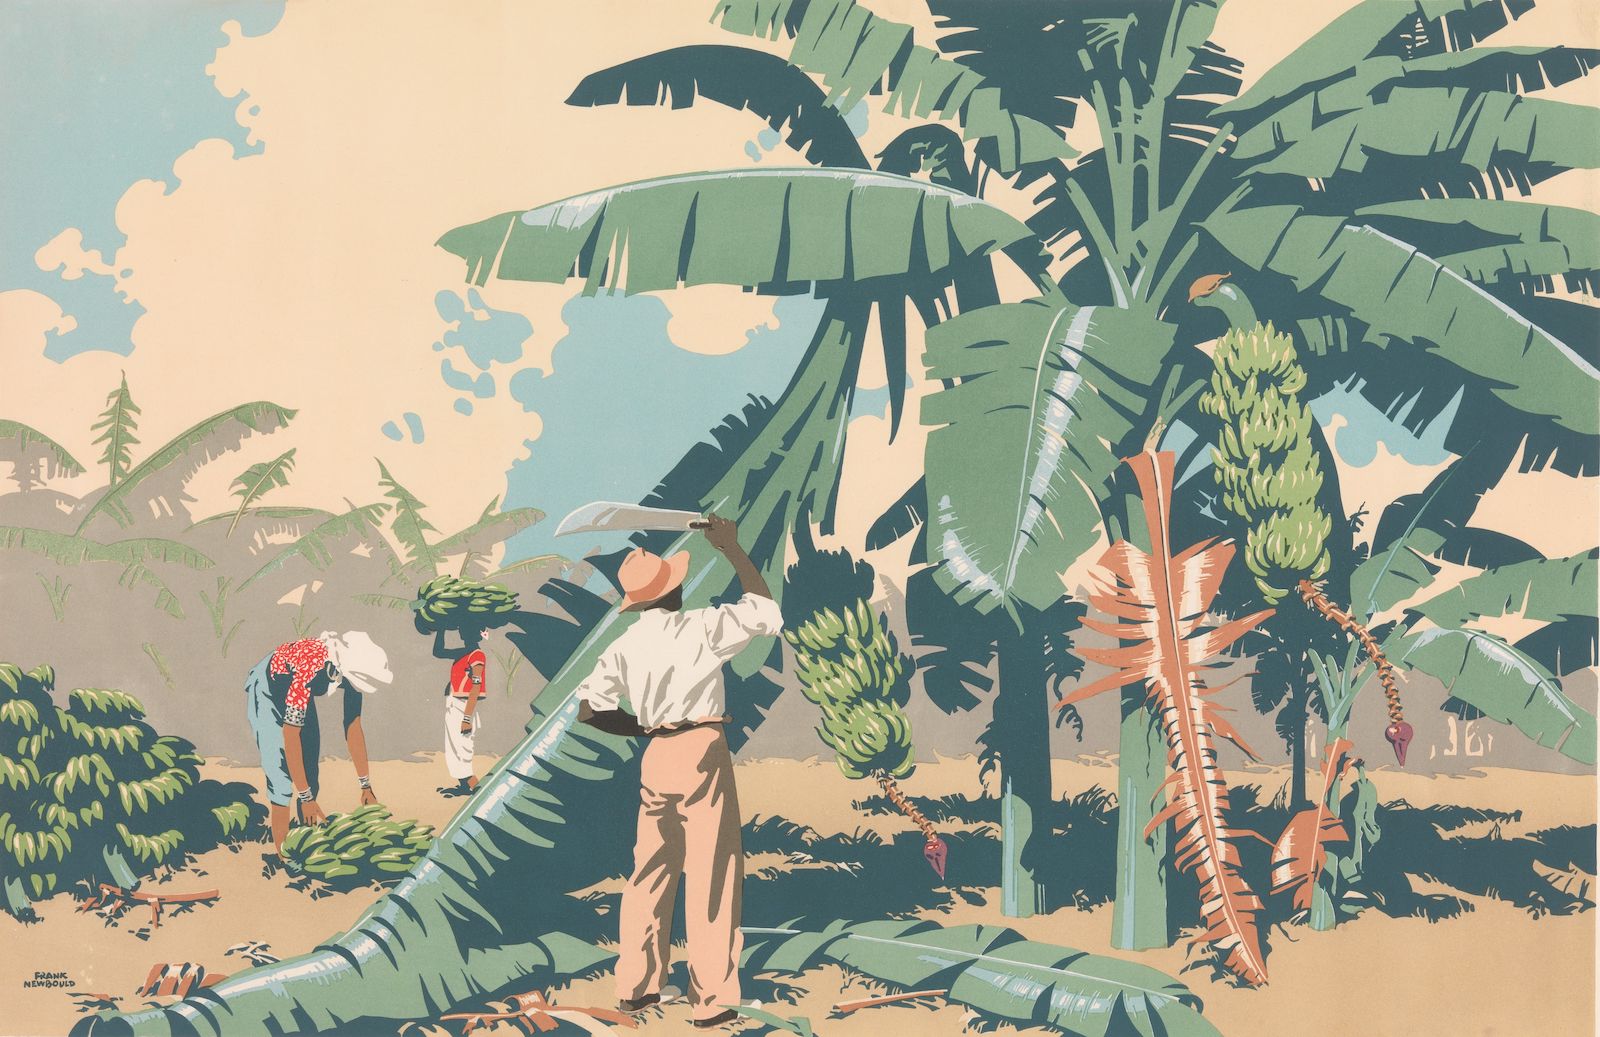 Empire Buying Makes Busy Factories: ‘Cutting Bananas in Jamaica’, C. 1930. Yale Center for British Art, Gift of Henry S. Hacker, Yale BA 1965. Public Domain..